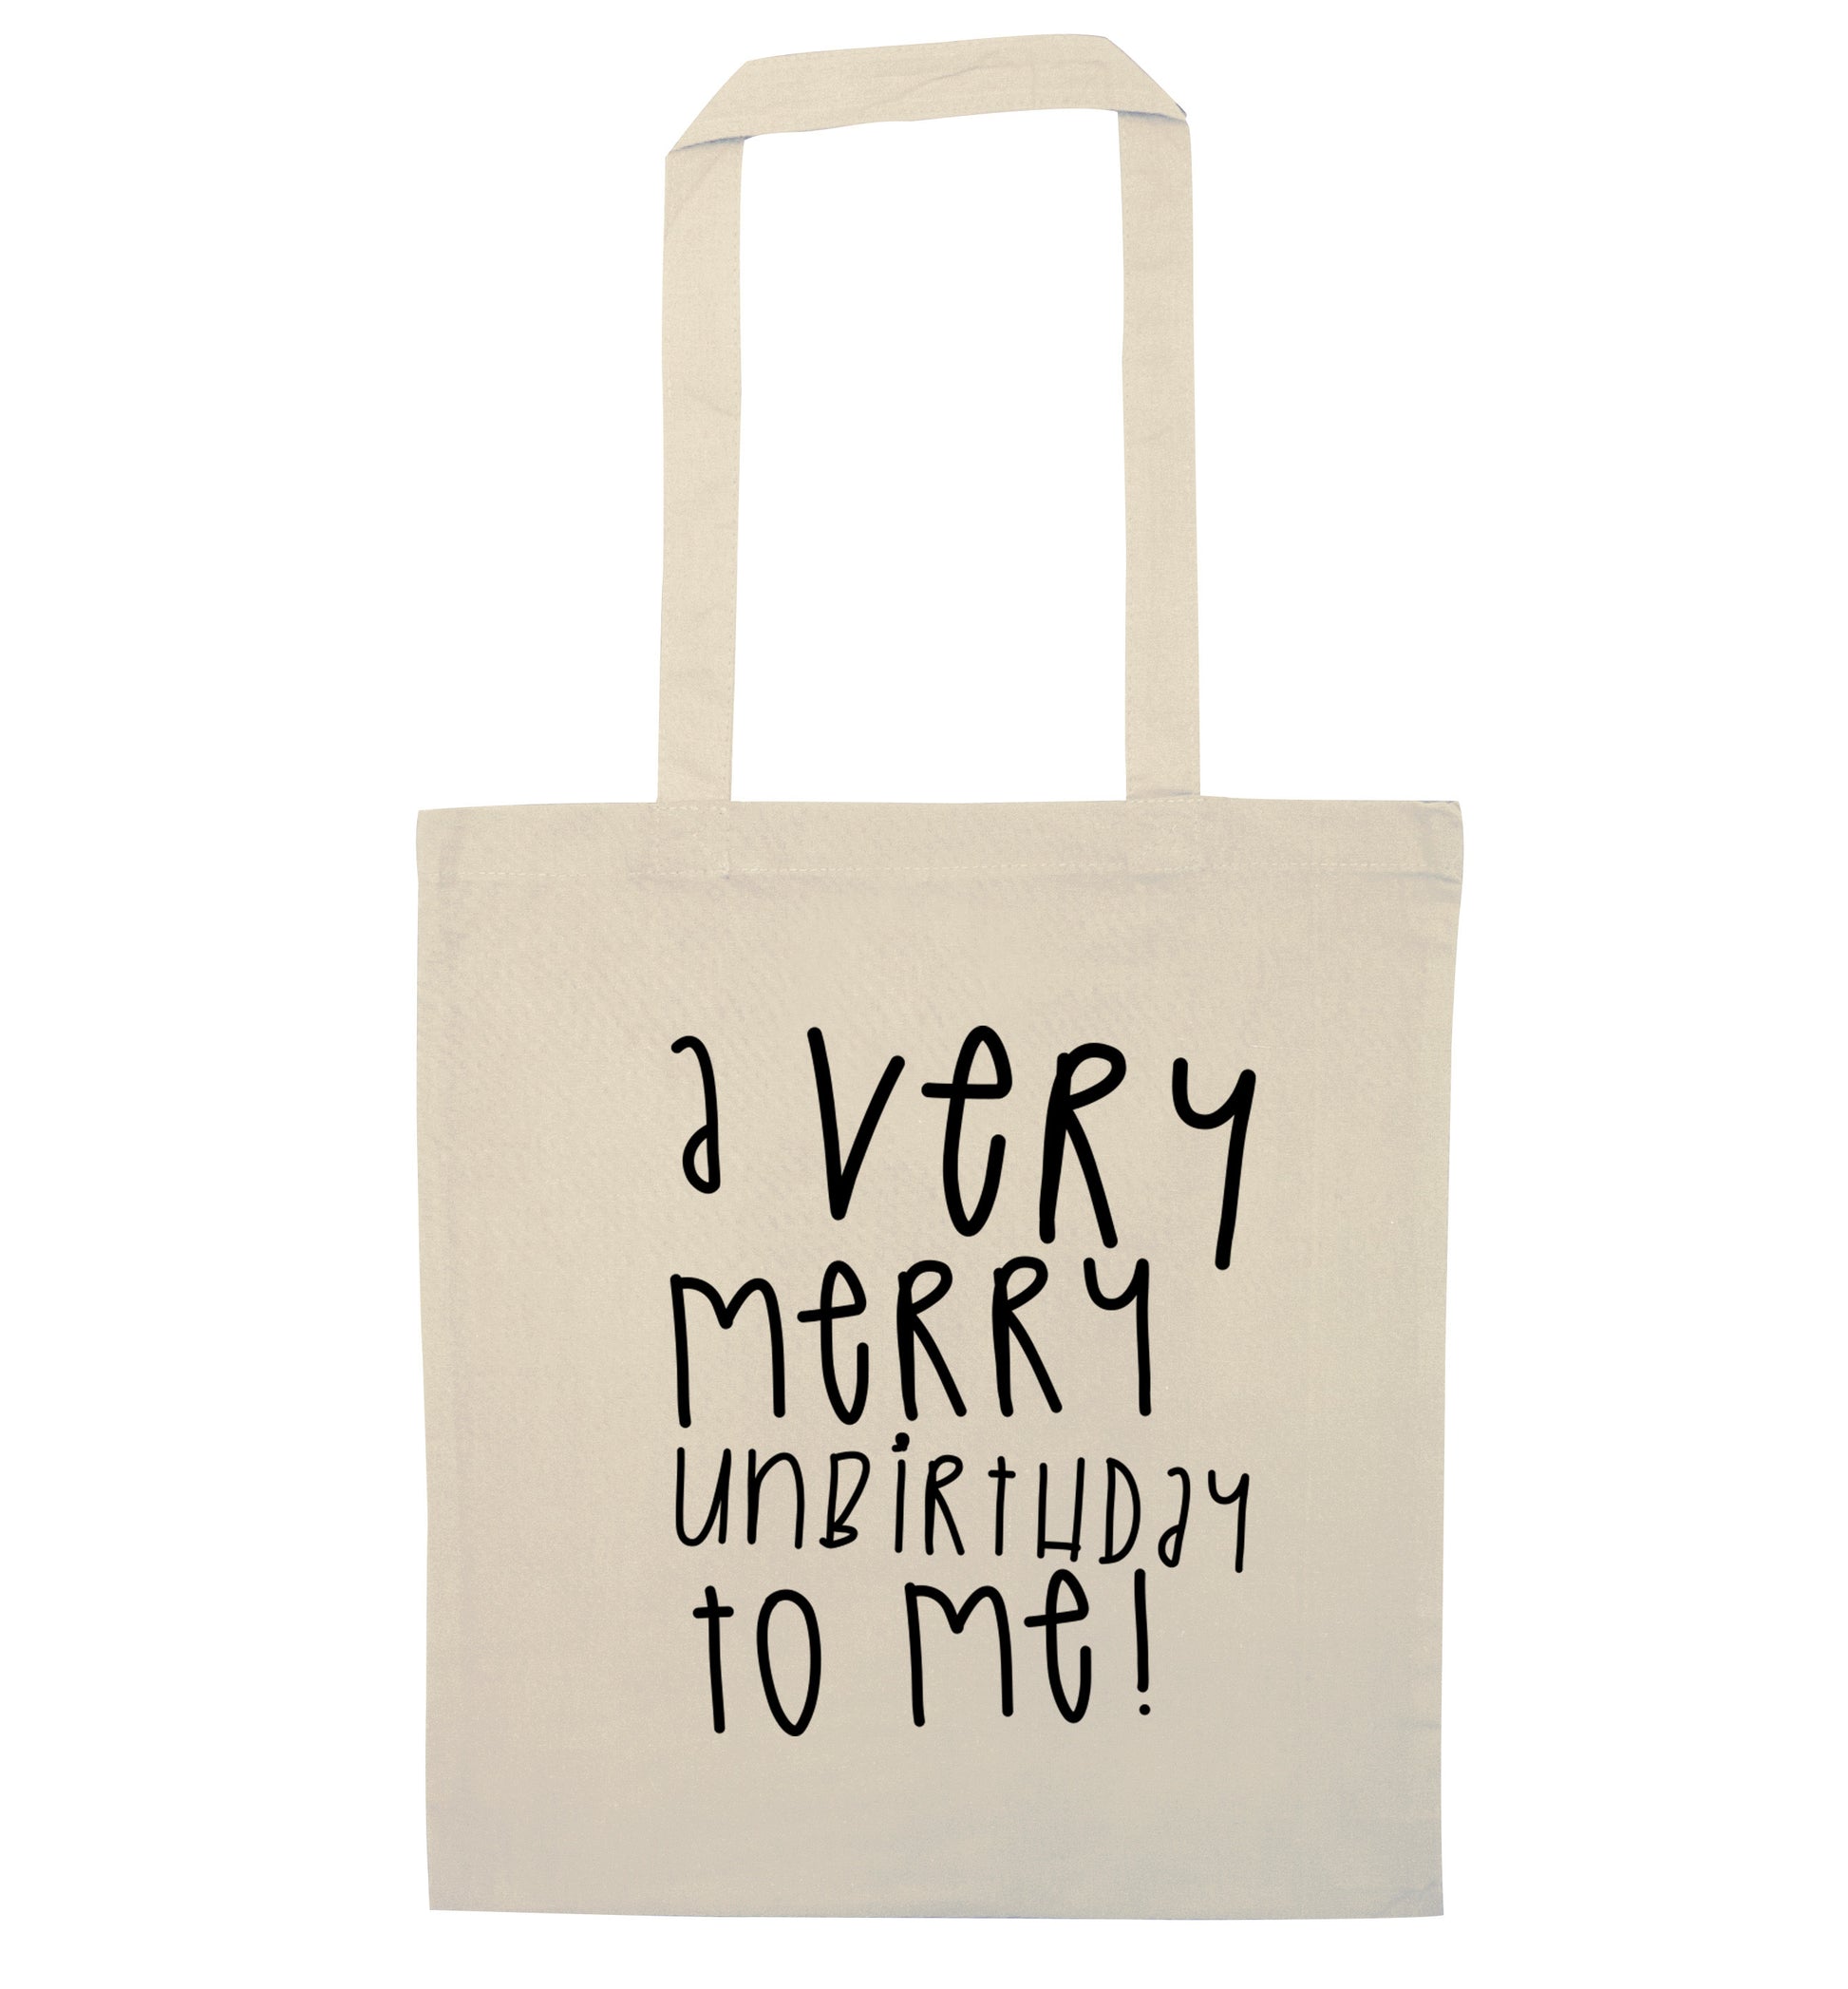 A very merry unbirthday to me! natural tote bag